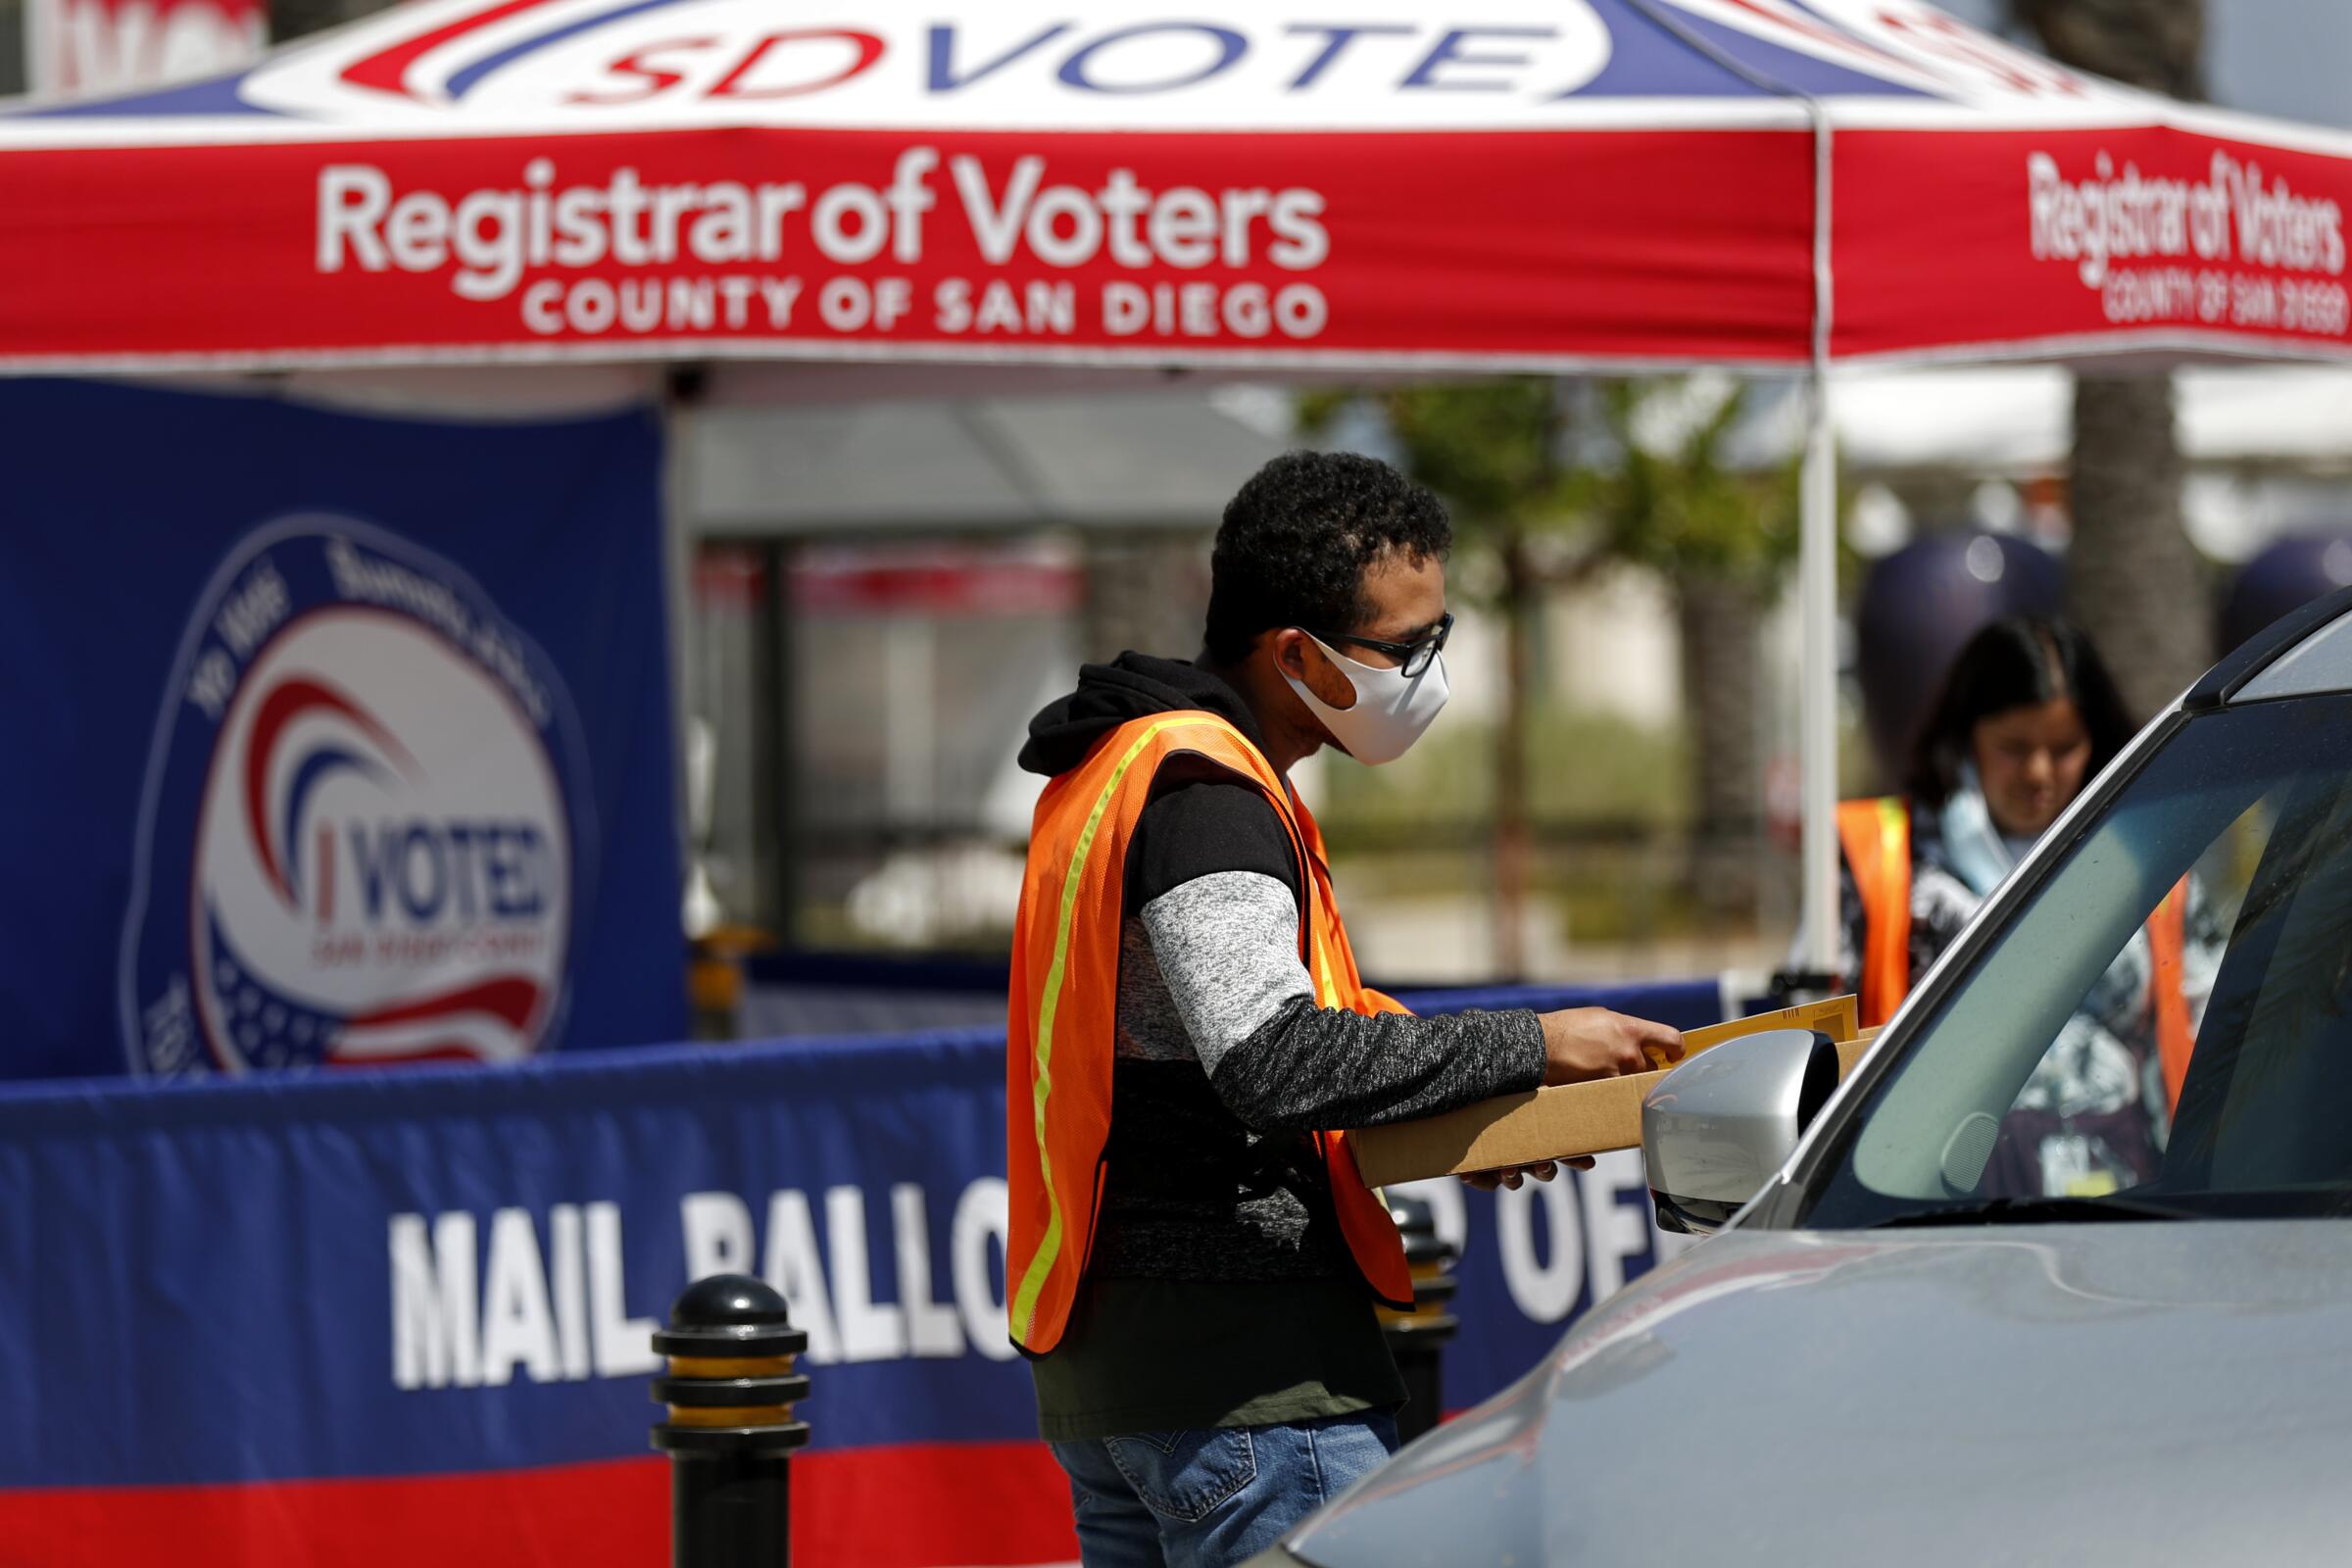 Anthony Alvarez collects recall ballots from voters dropping them off at the San Diego County Registrar of Voters